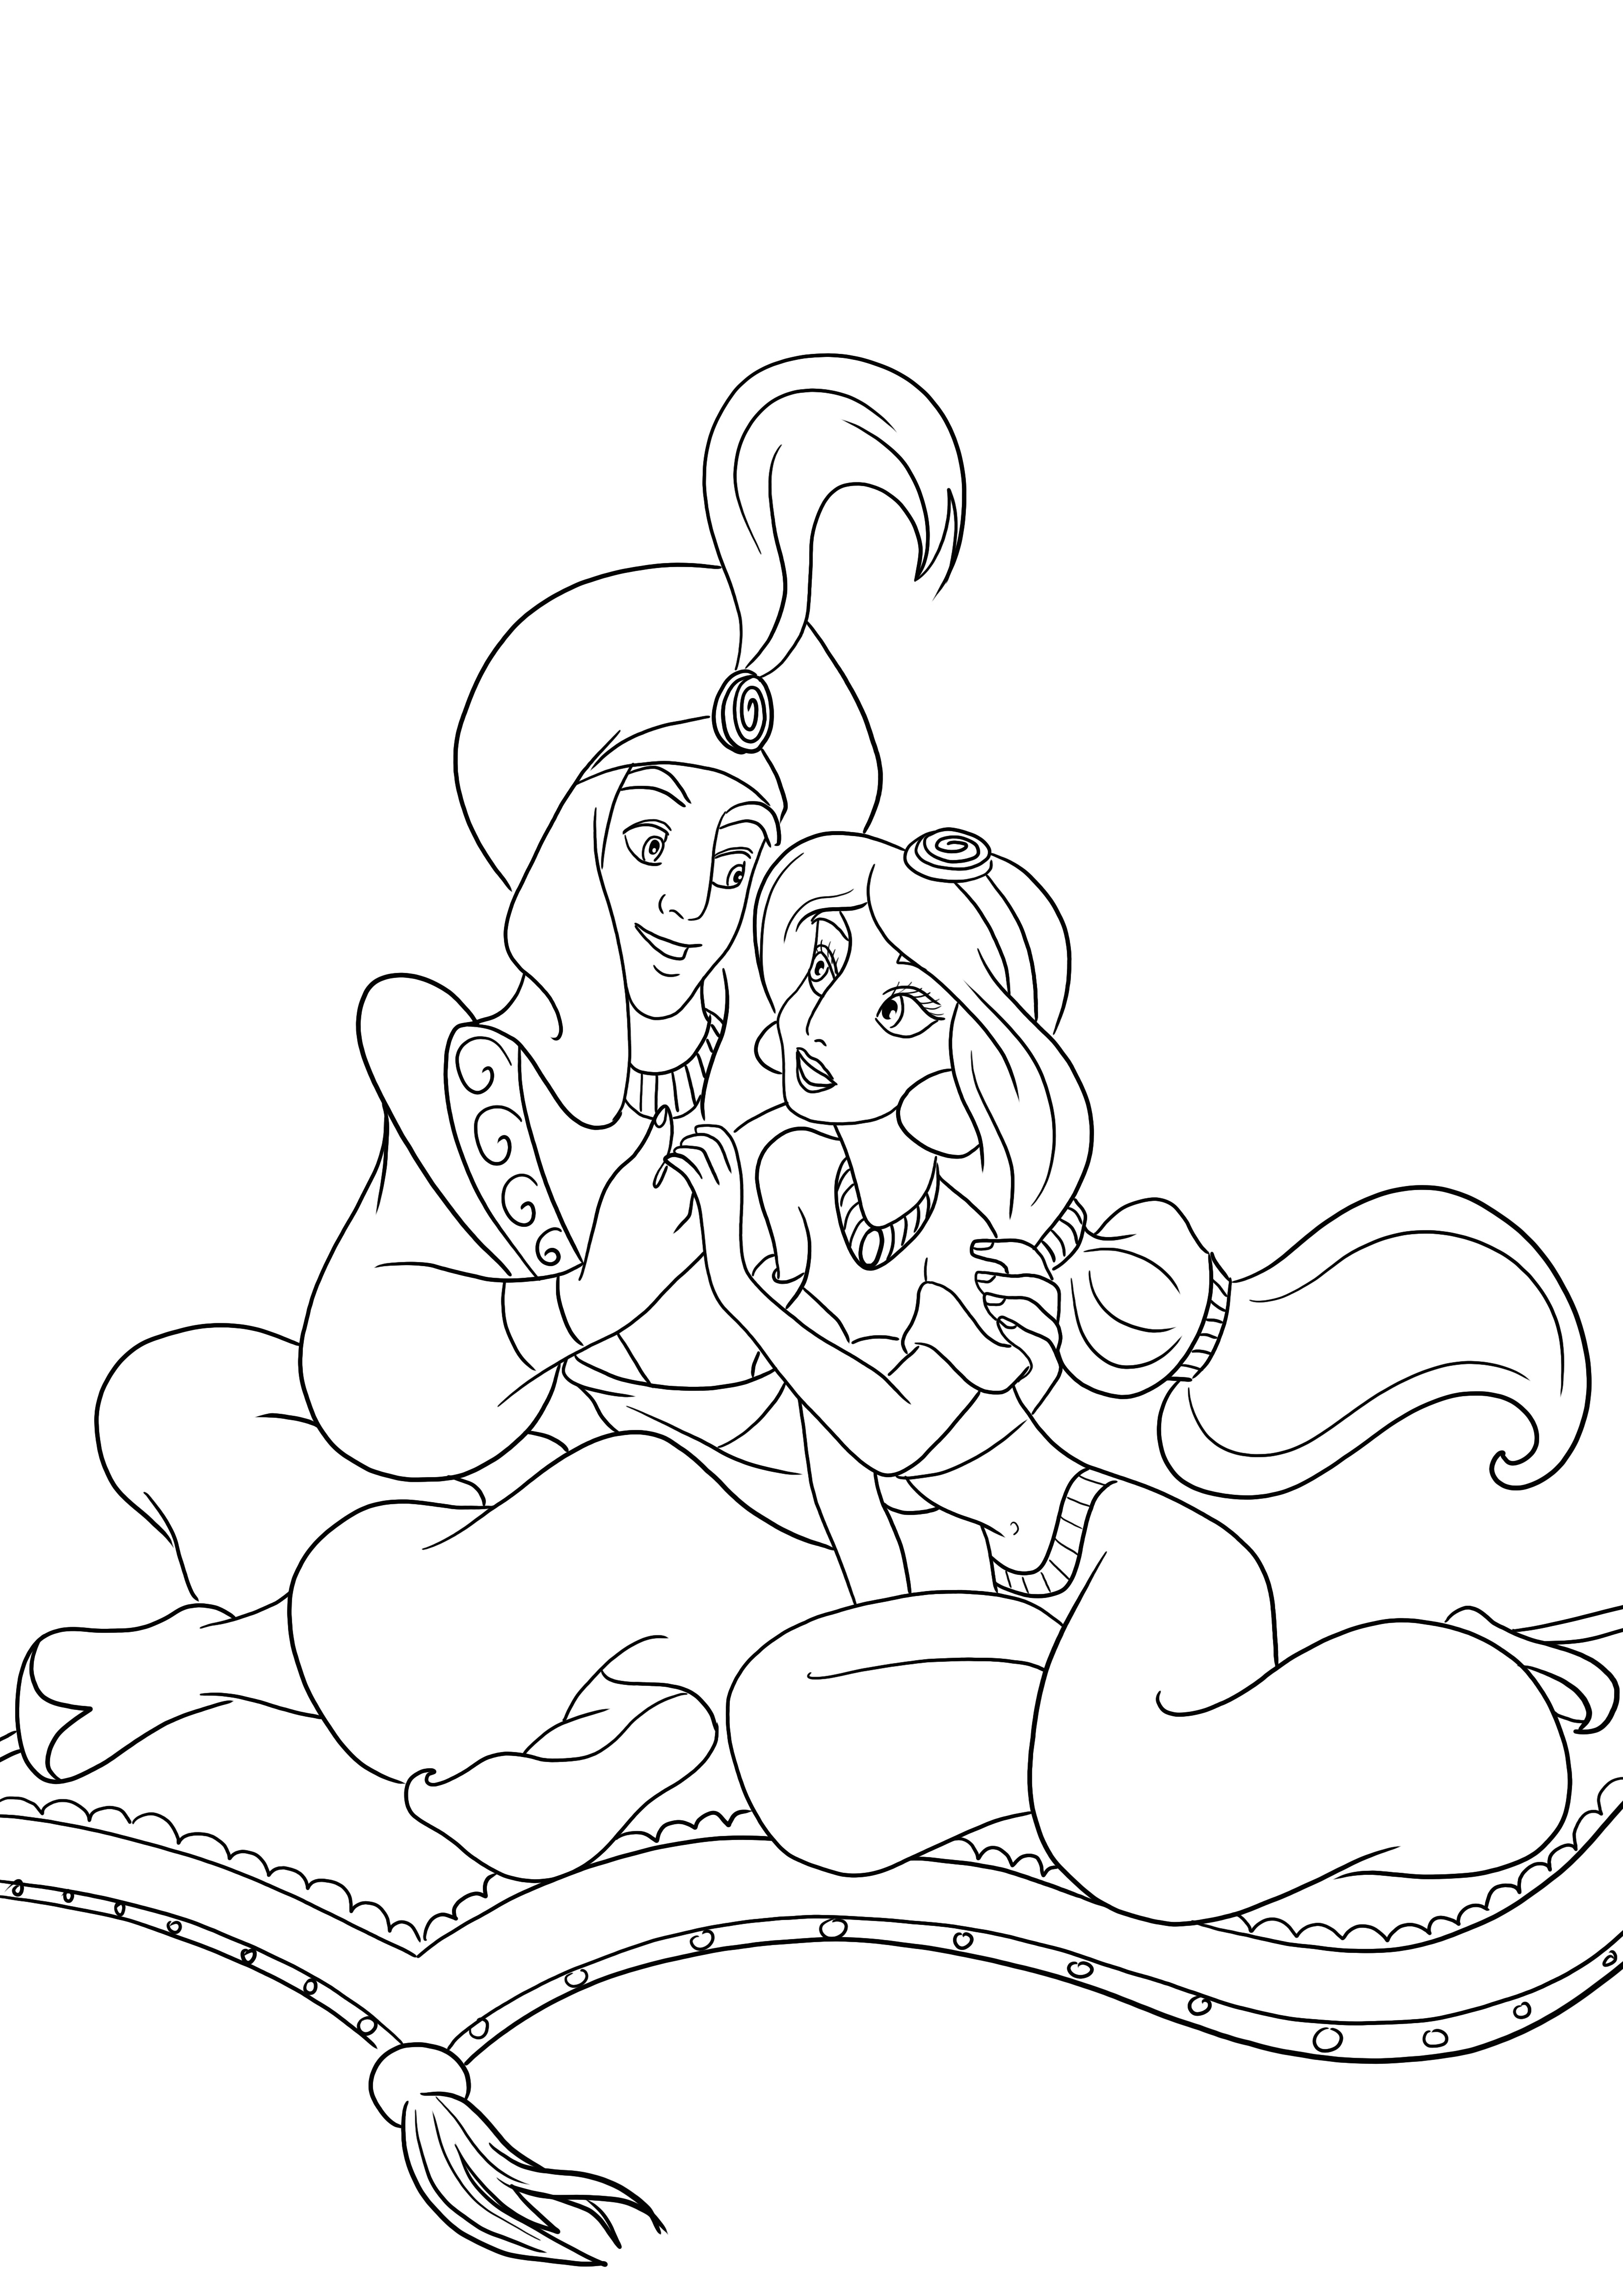 Aladdin and Jasmine are in love and ready for coloring and print free